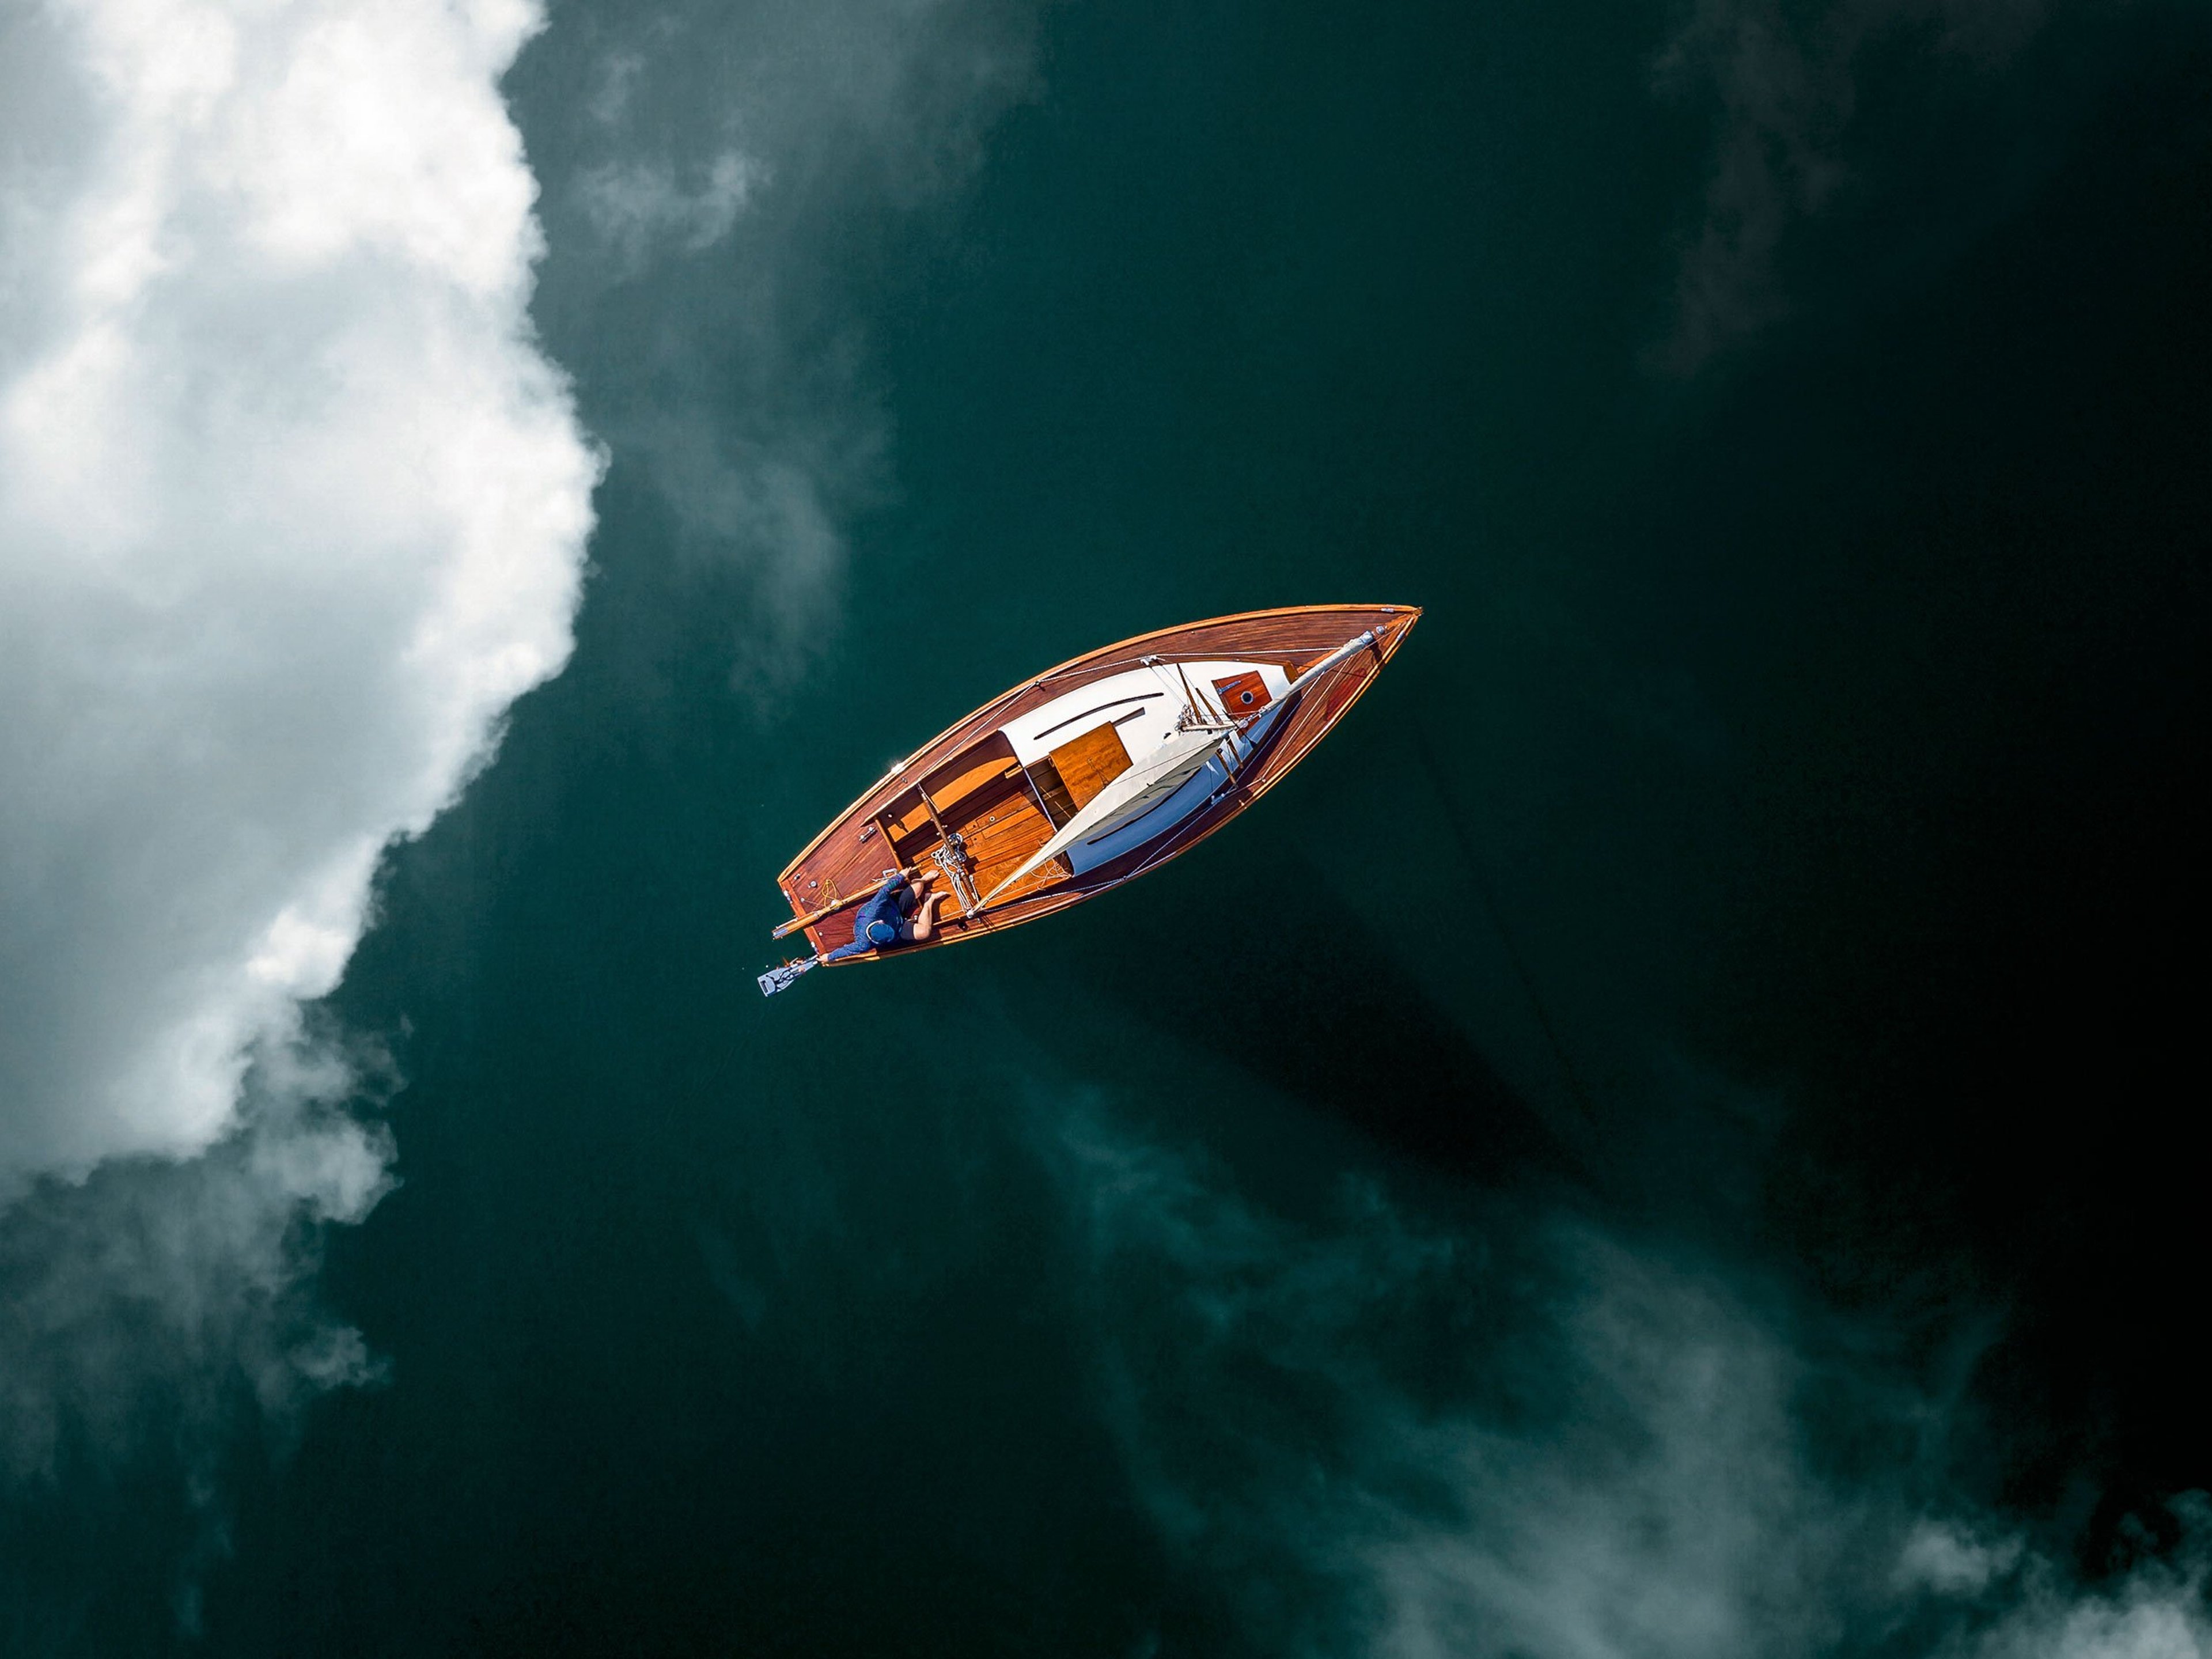 An aerial view of a sailing boat floating on still water with clouds reflected on the surface.